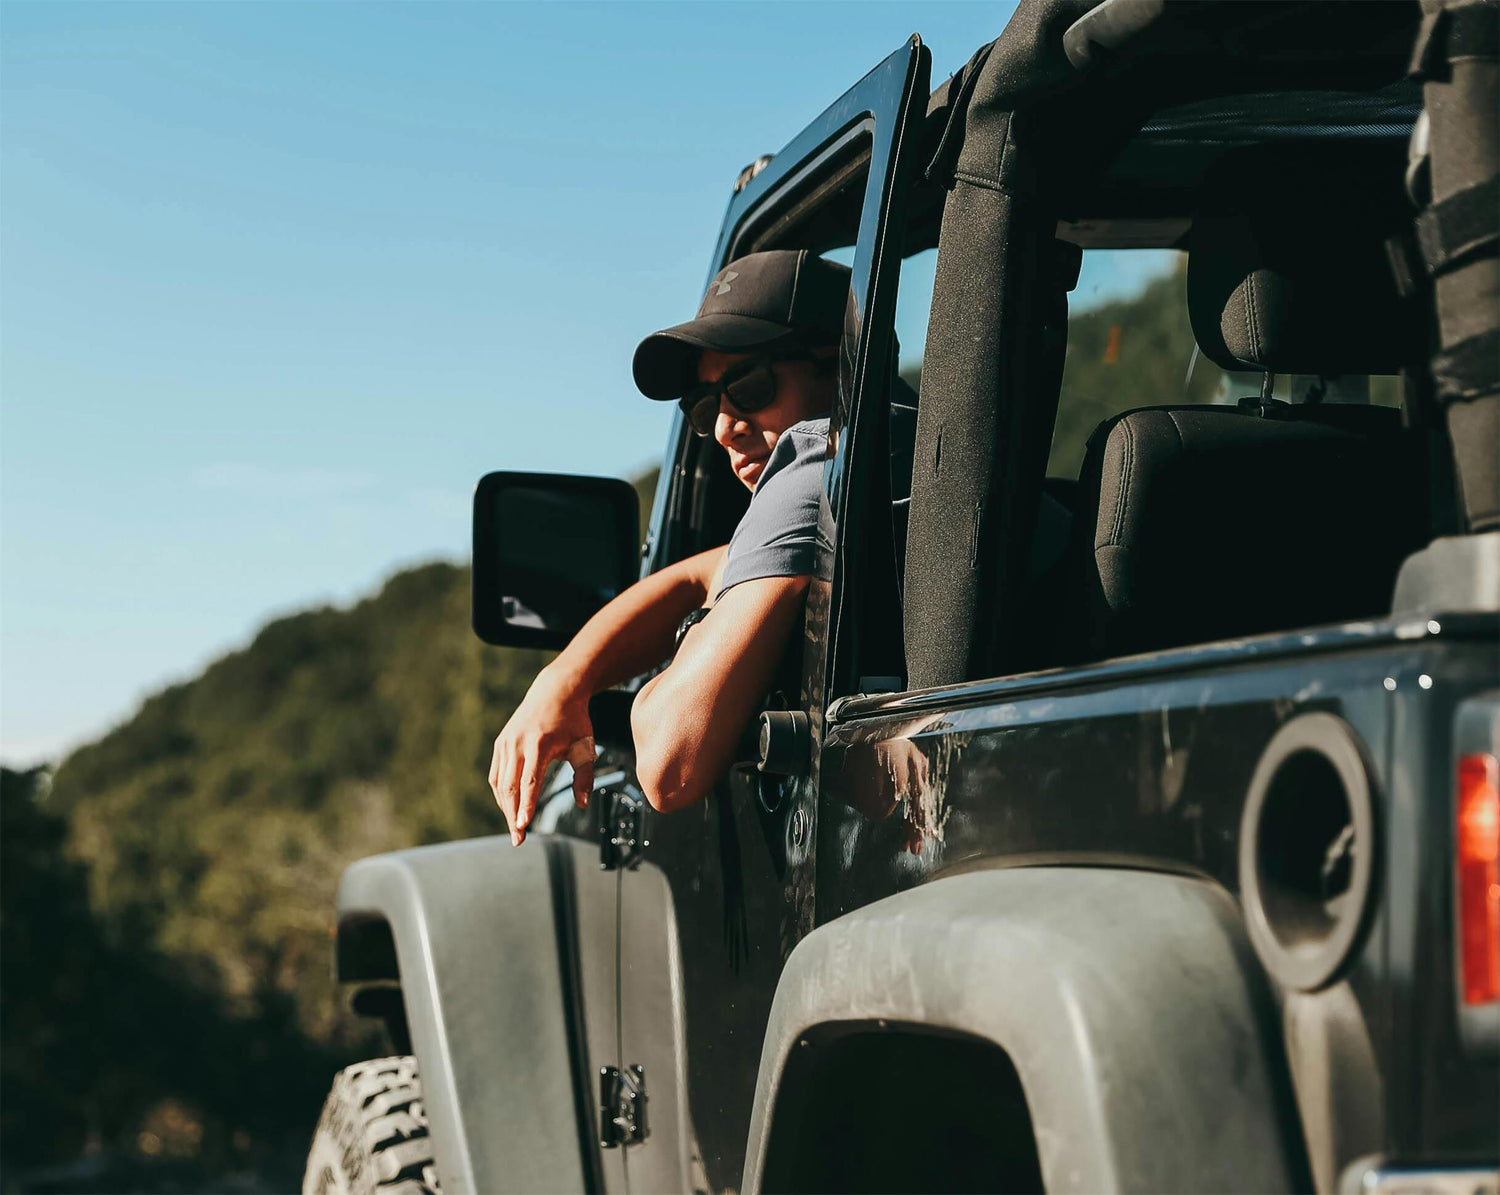 Join the adventure! A cool guy in a hat and sunglasses takes the wheel of a jeep. Discover the great outdoors with Apexel founder and outdoor life lover.